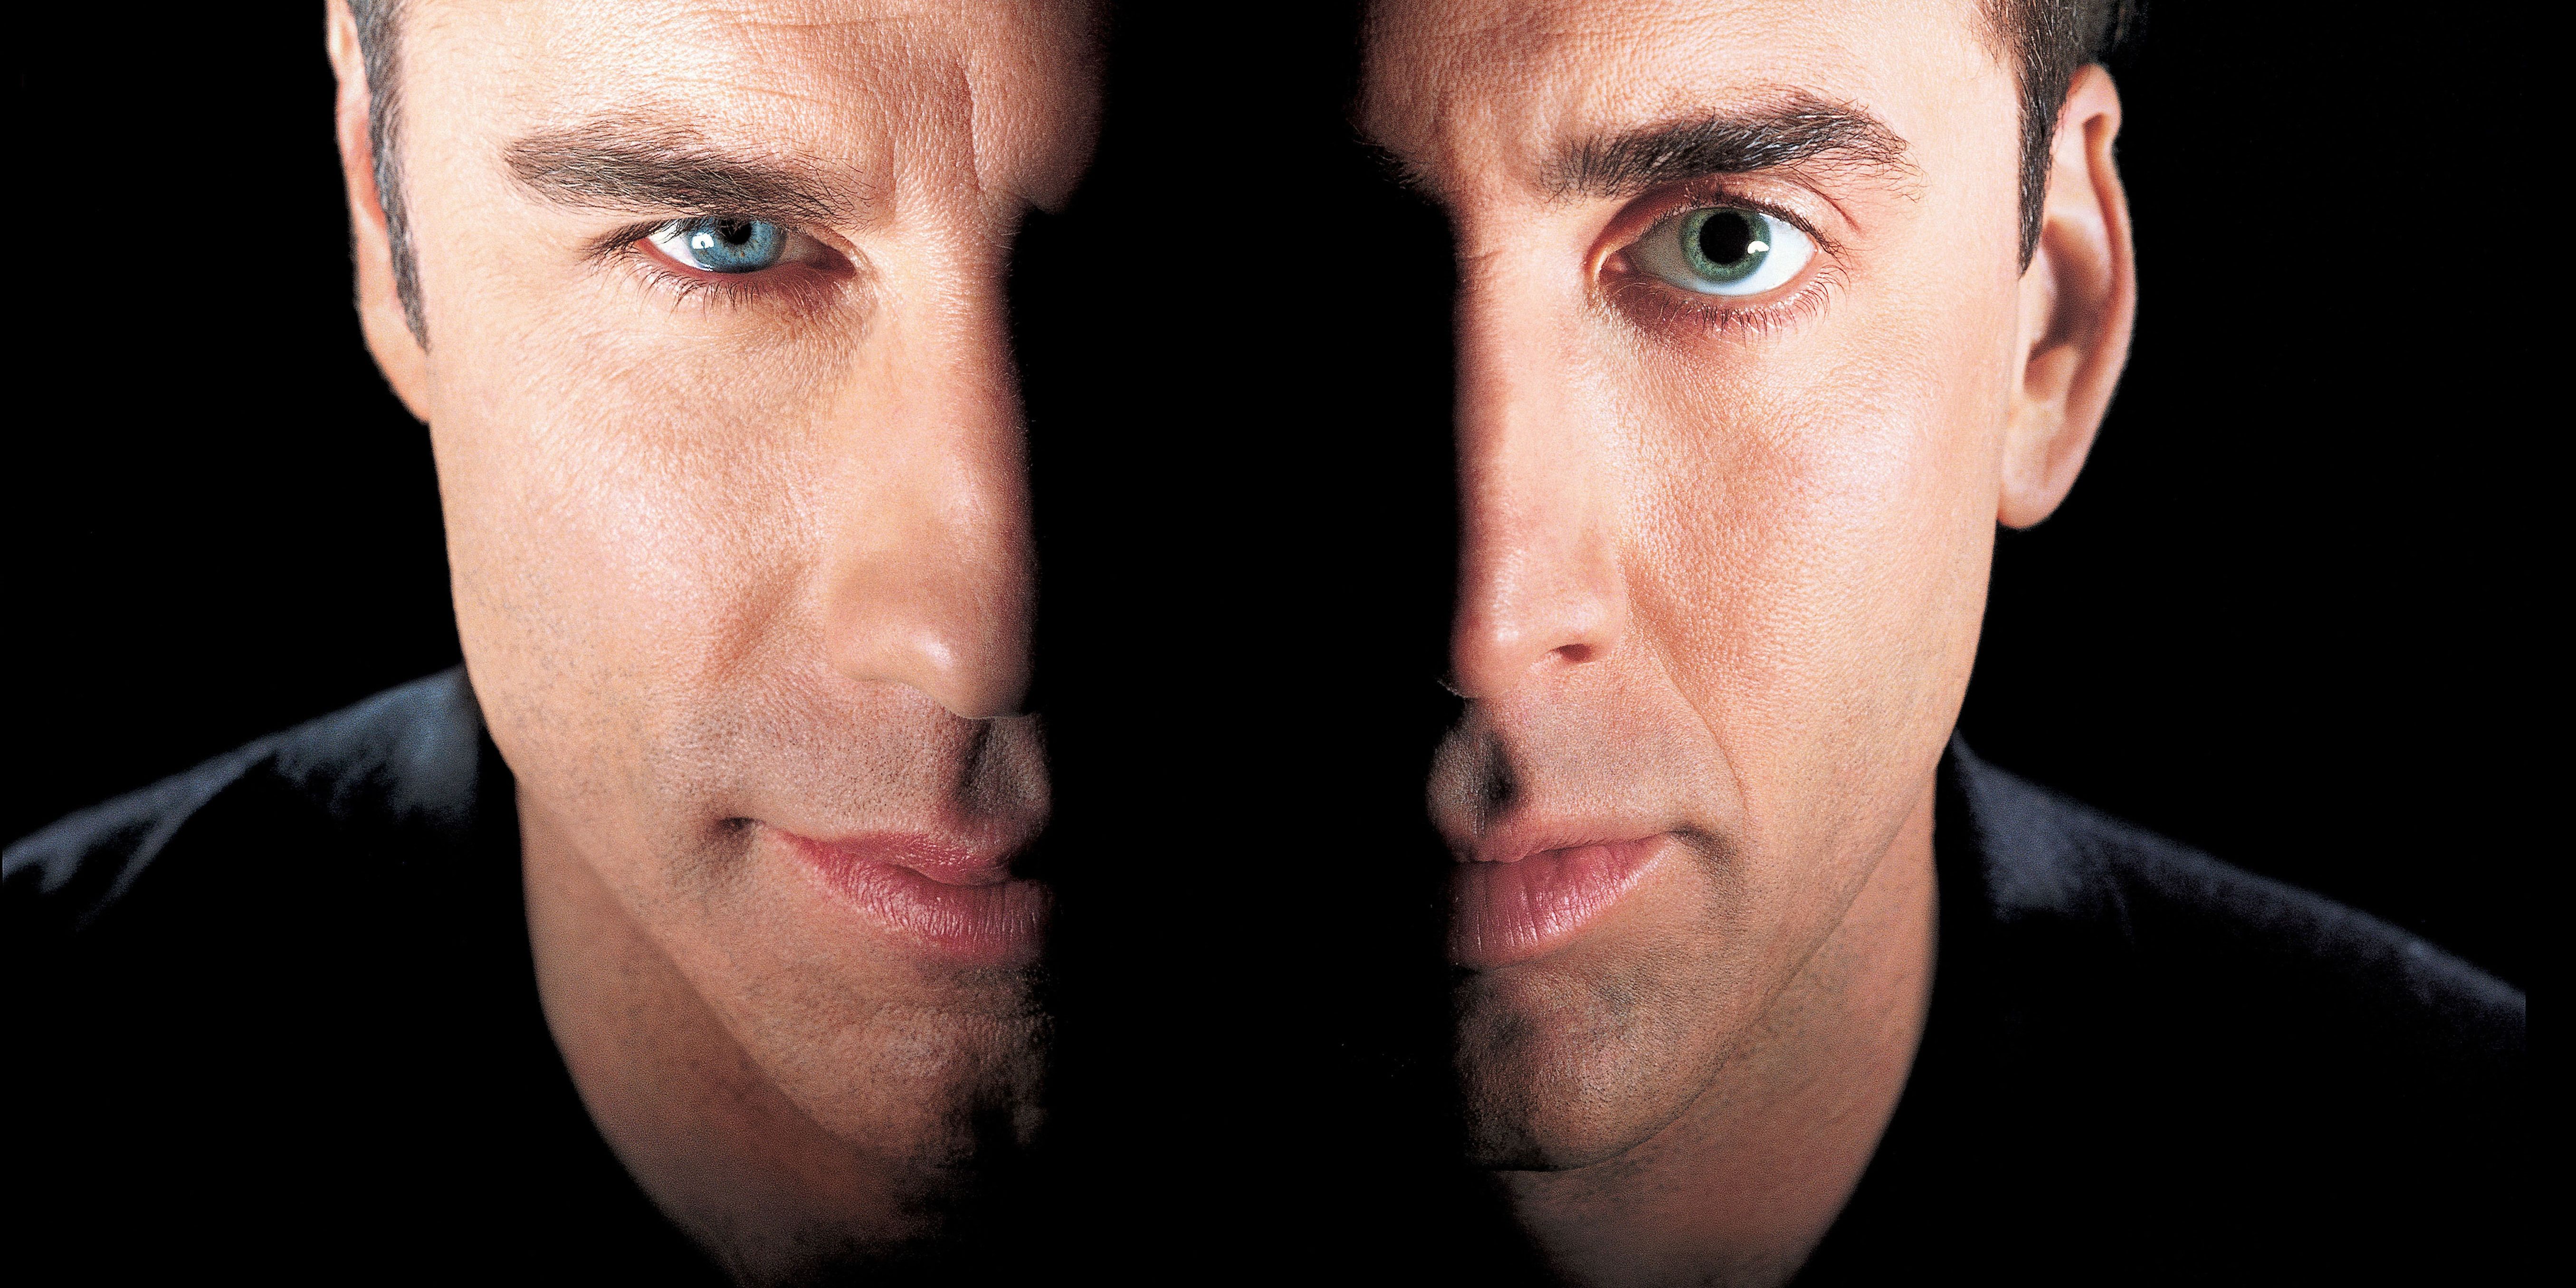 The poster of Face/Off